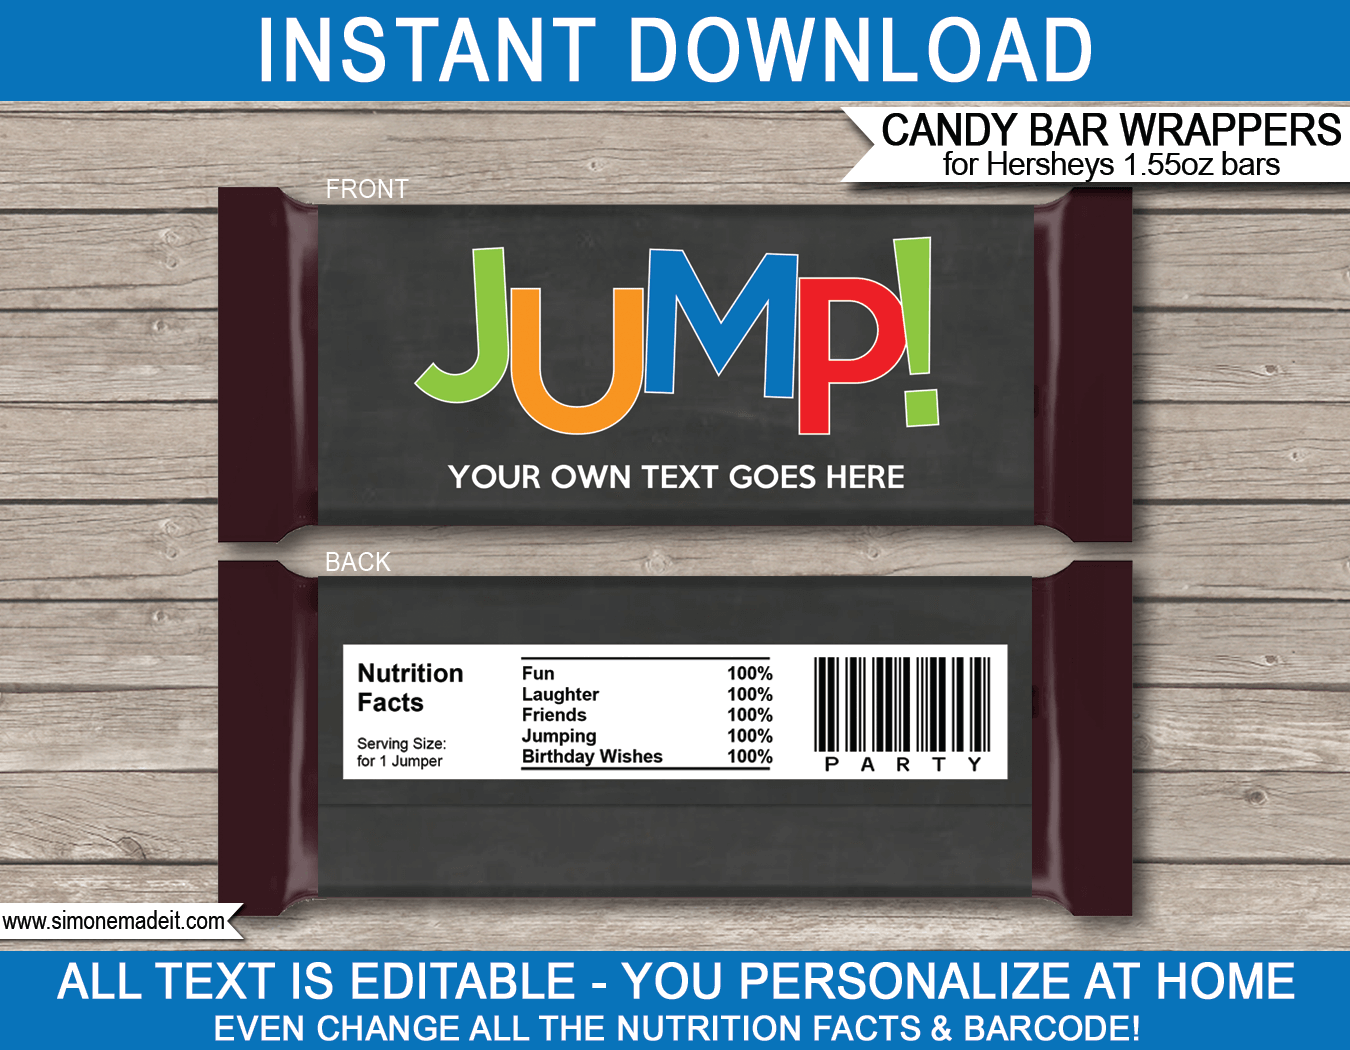 Trampoline Hershey Candy Bar Wrappers | Birthday Party Favors | Personalized Candy Bars | Editable Template | INSTANT DOWNLOAD $3.00 via simonemadeit.com